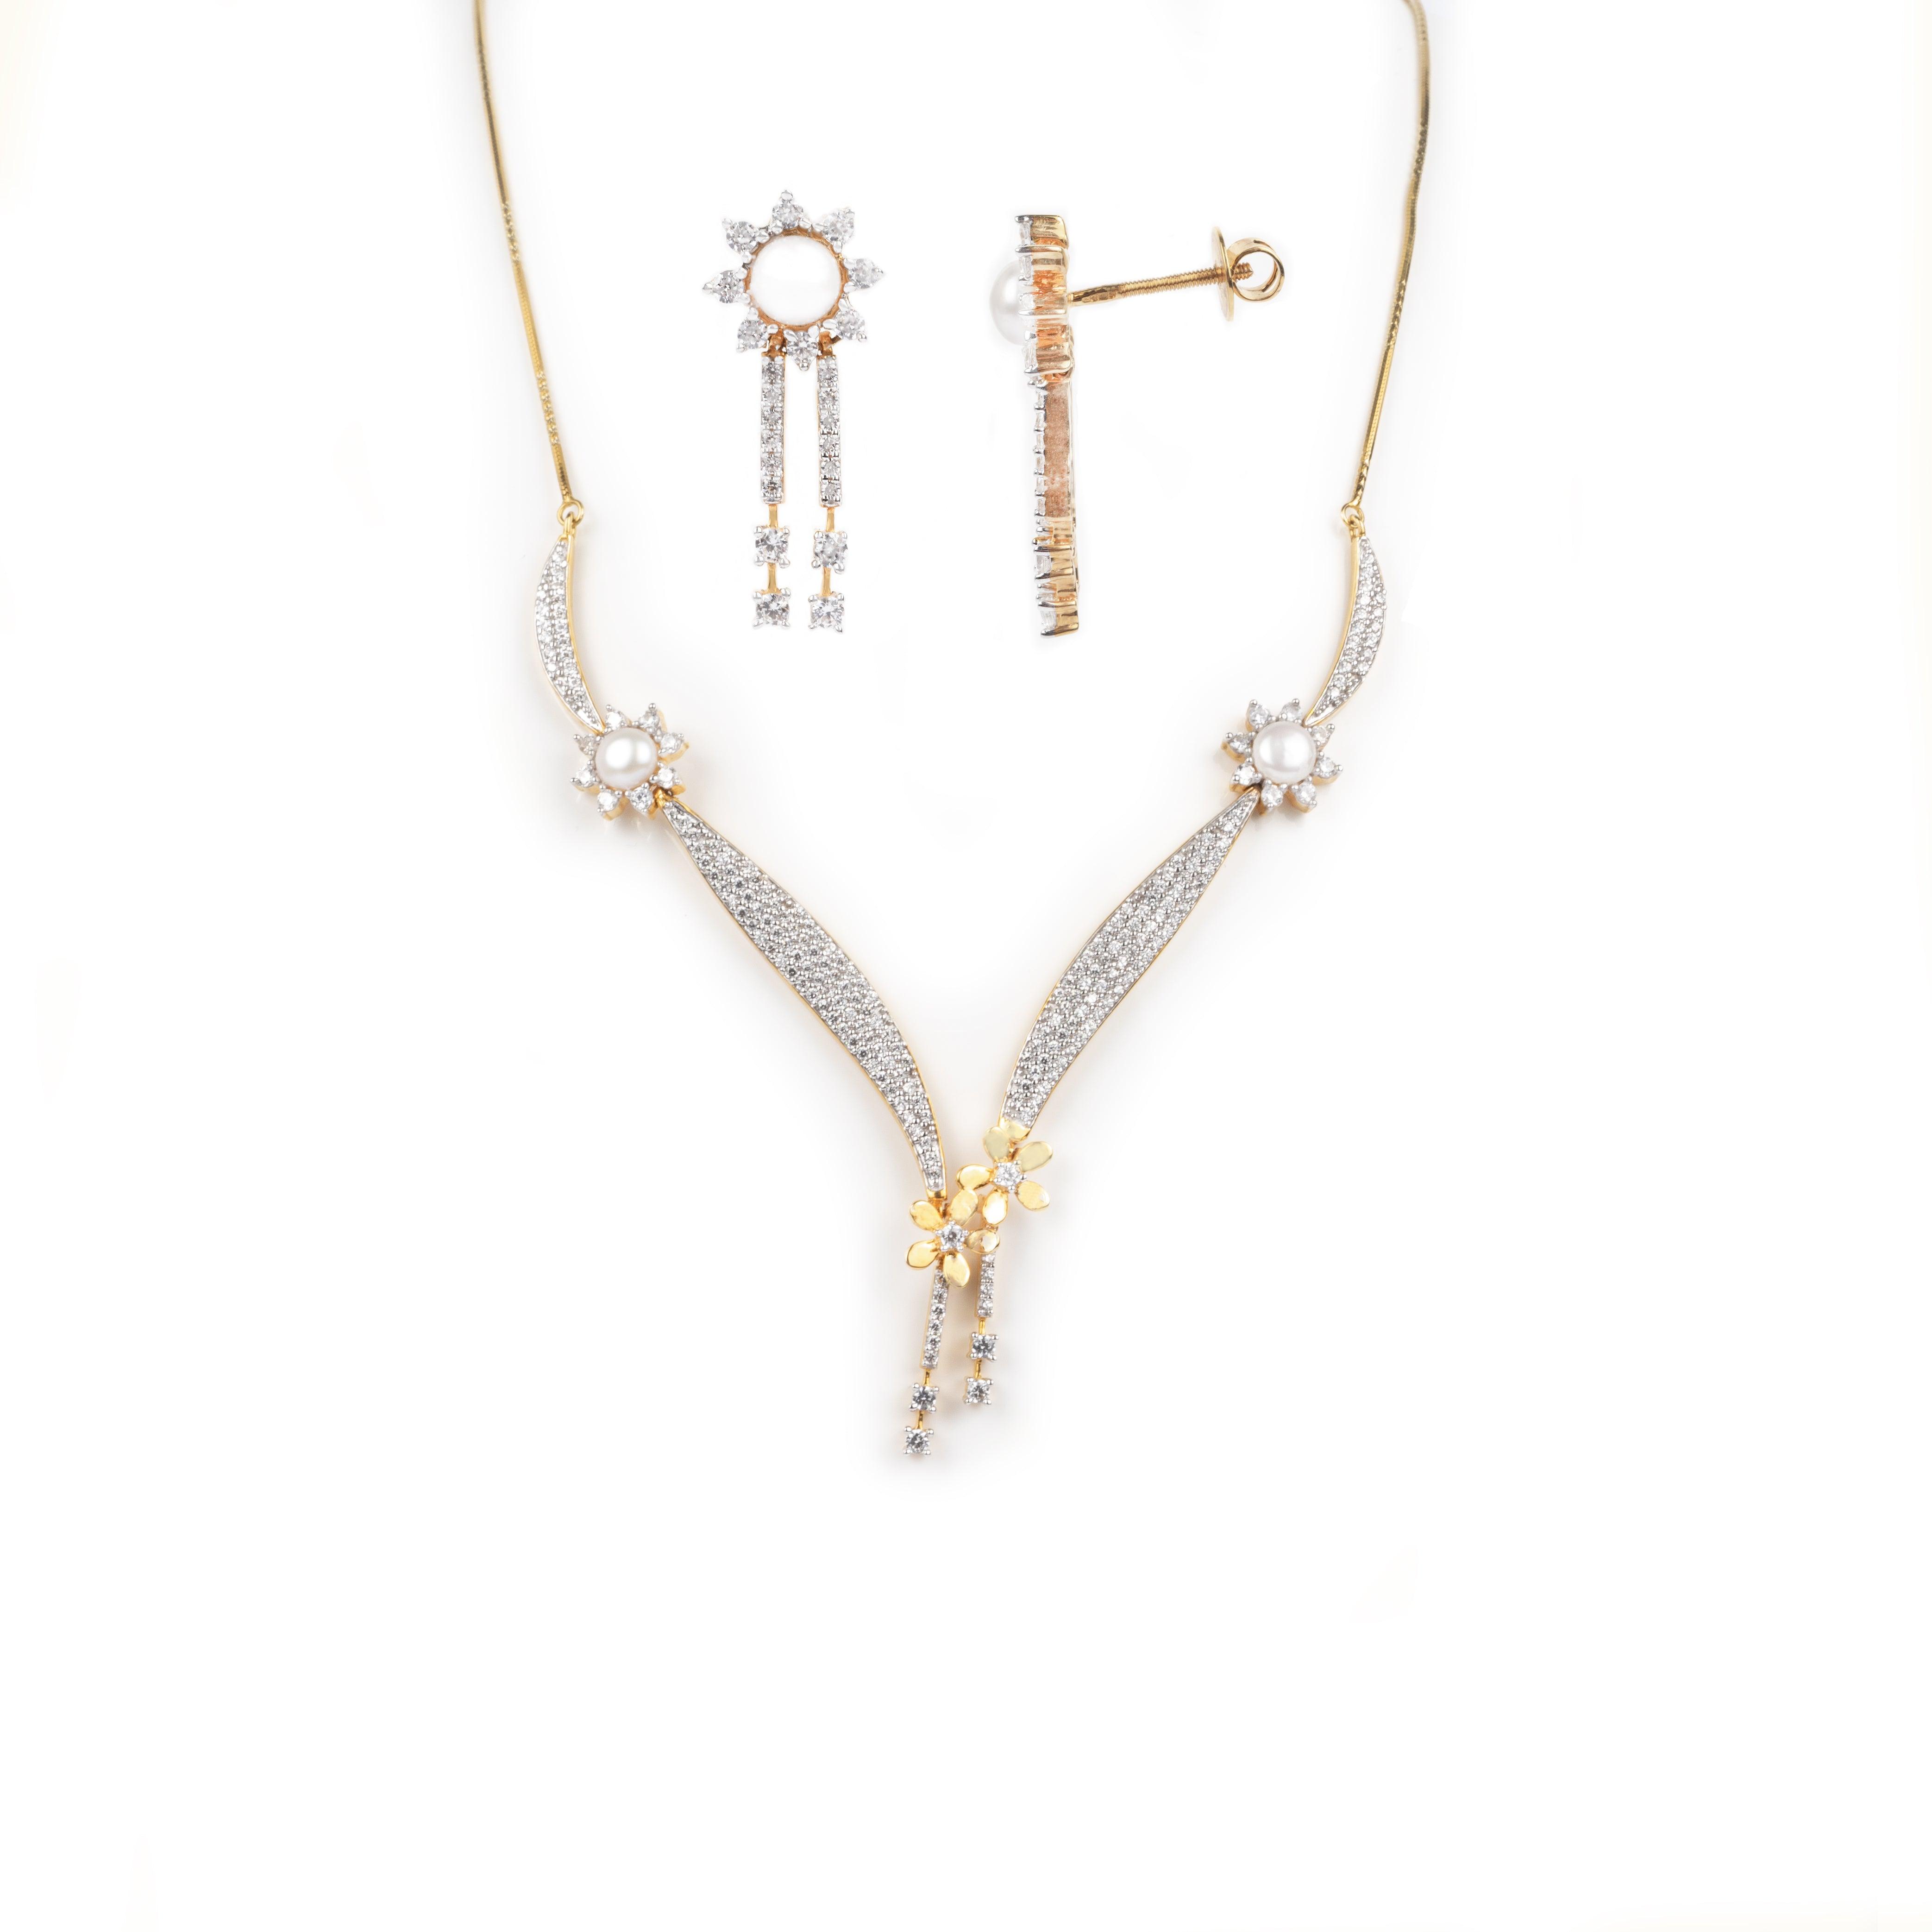 18ct Yellow Gold Necklace and Earrings set with Cubic Zirconia stones and Cultured Pearls (27g) N&E-5531 - Minar Jewellers